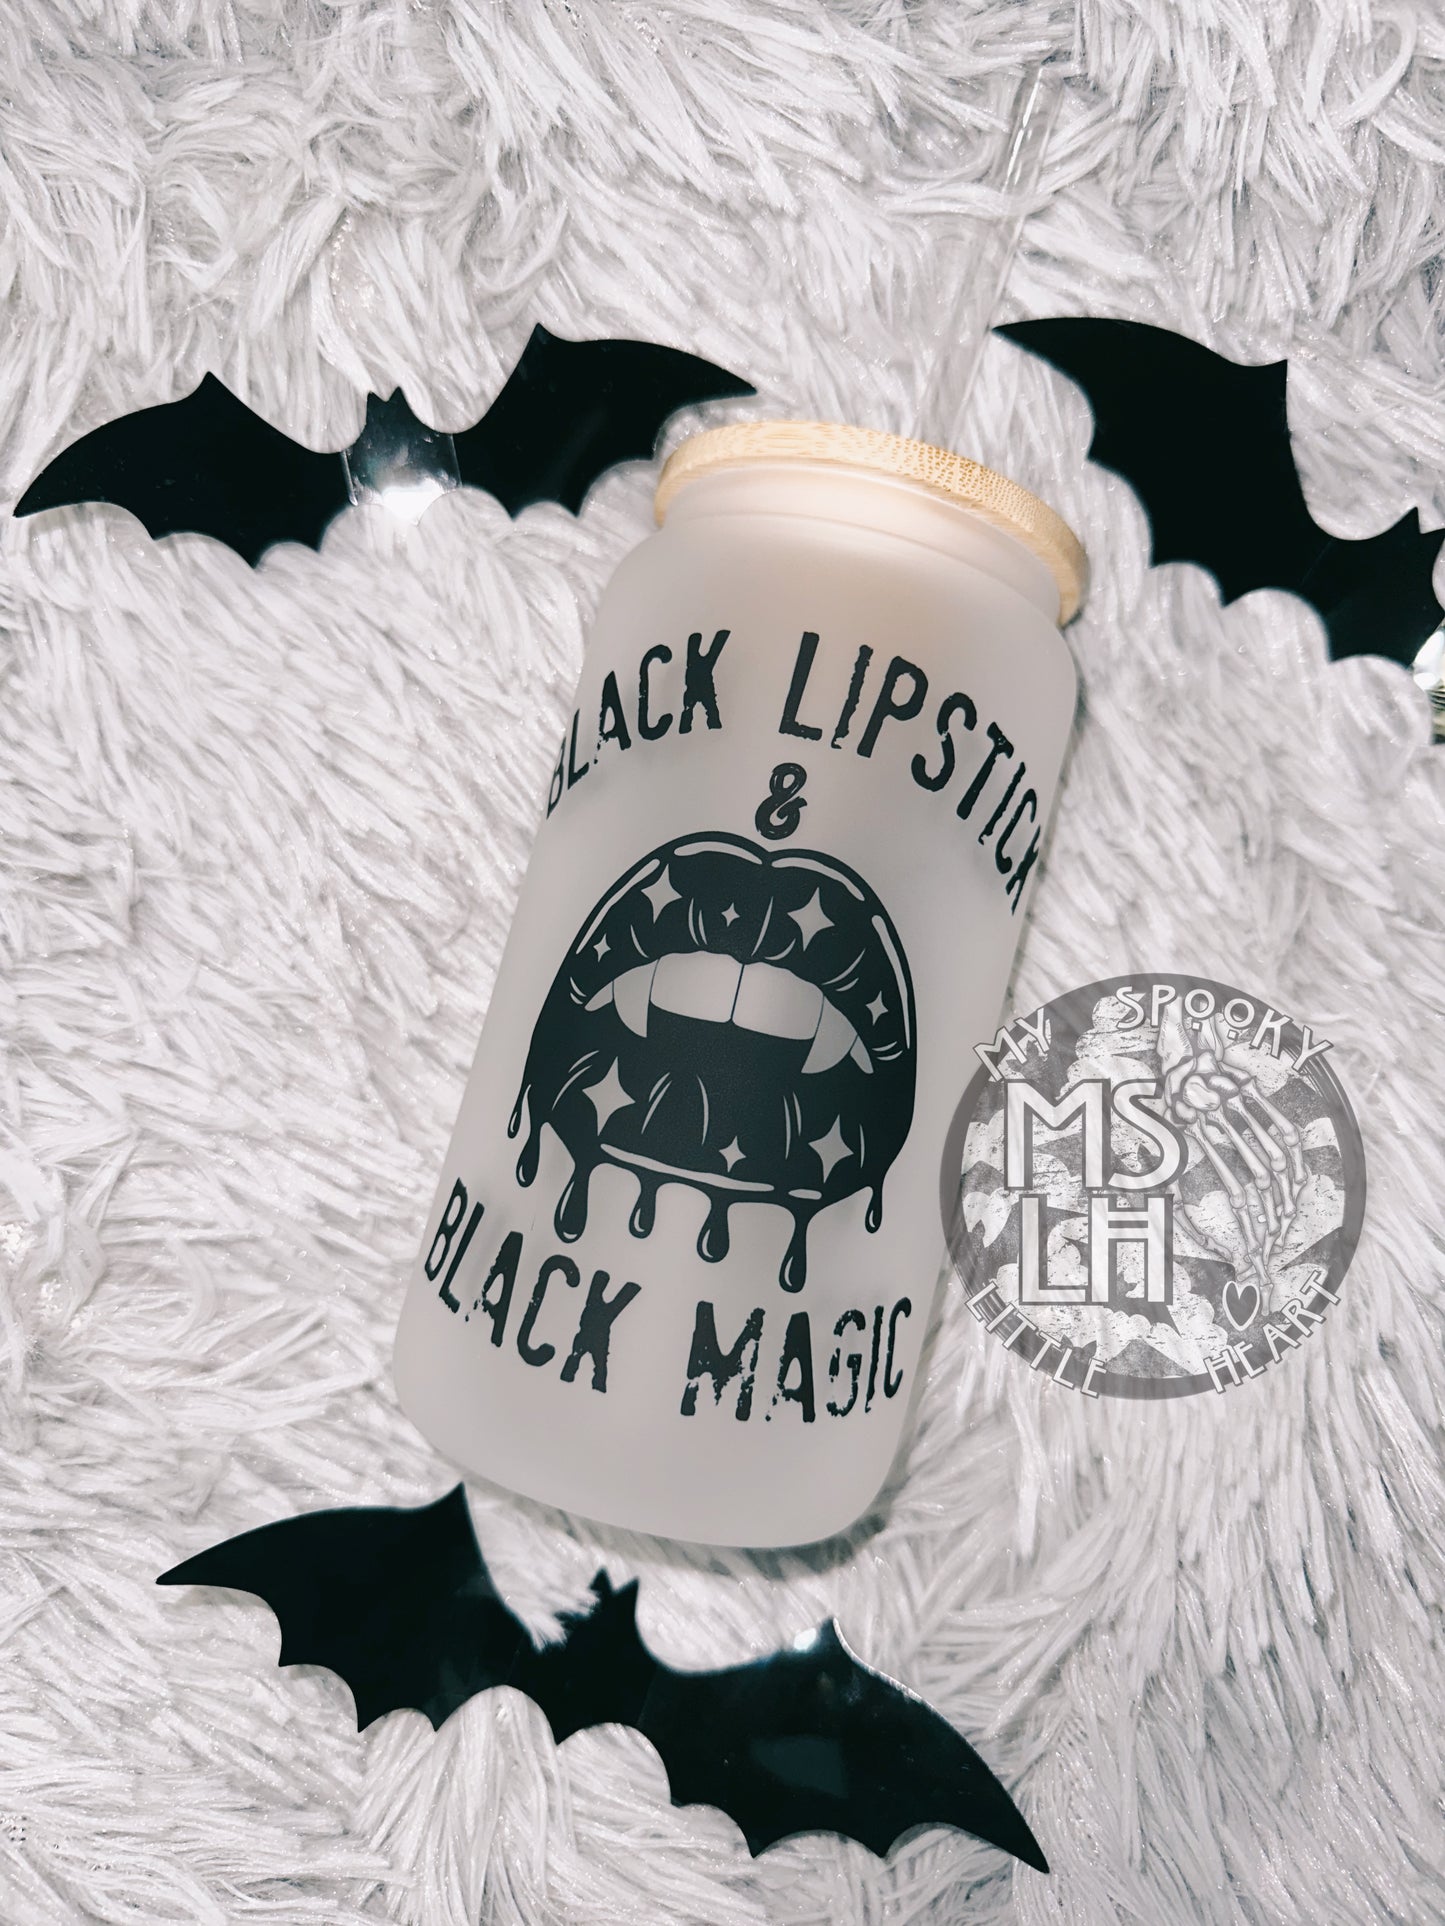 Black Lipstick & Black Magic 16oz Frosted Glass Cup